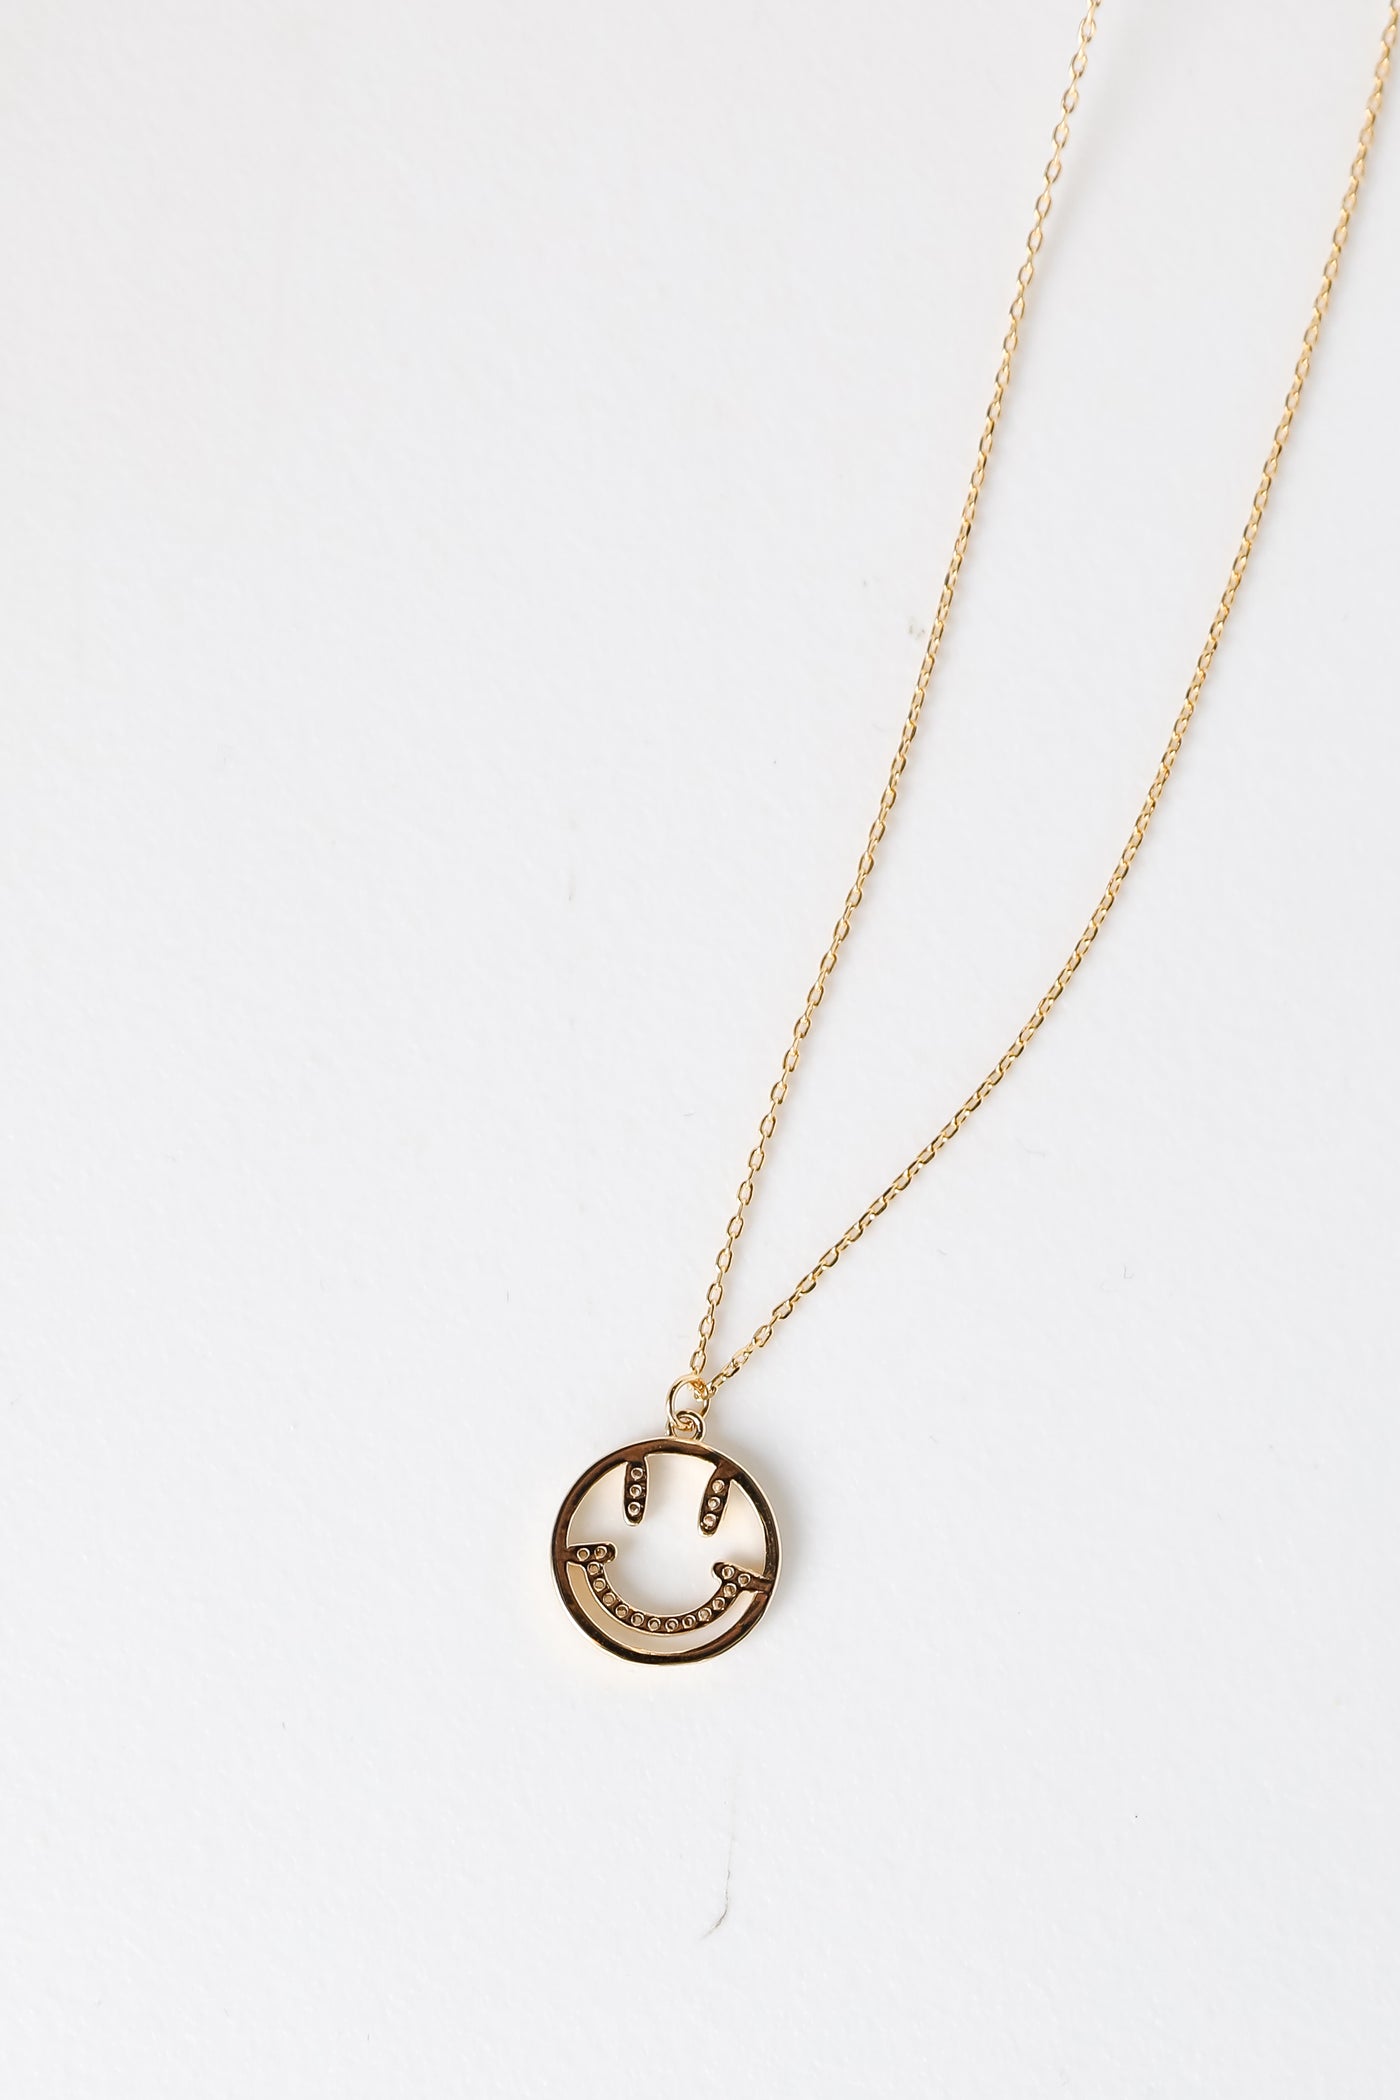 Gold Rhinestone Smiley Face Charm Necklace flat lay